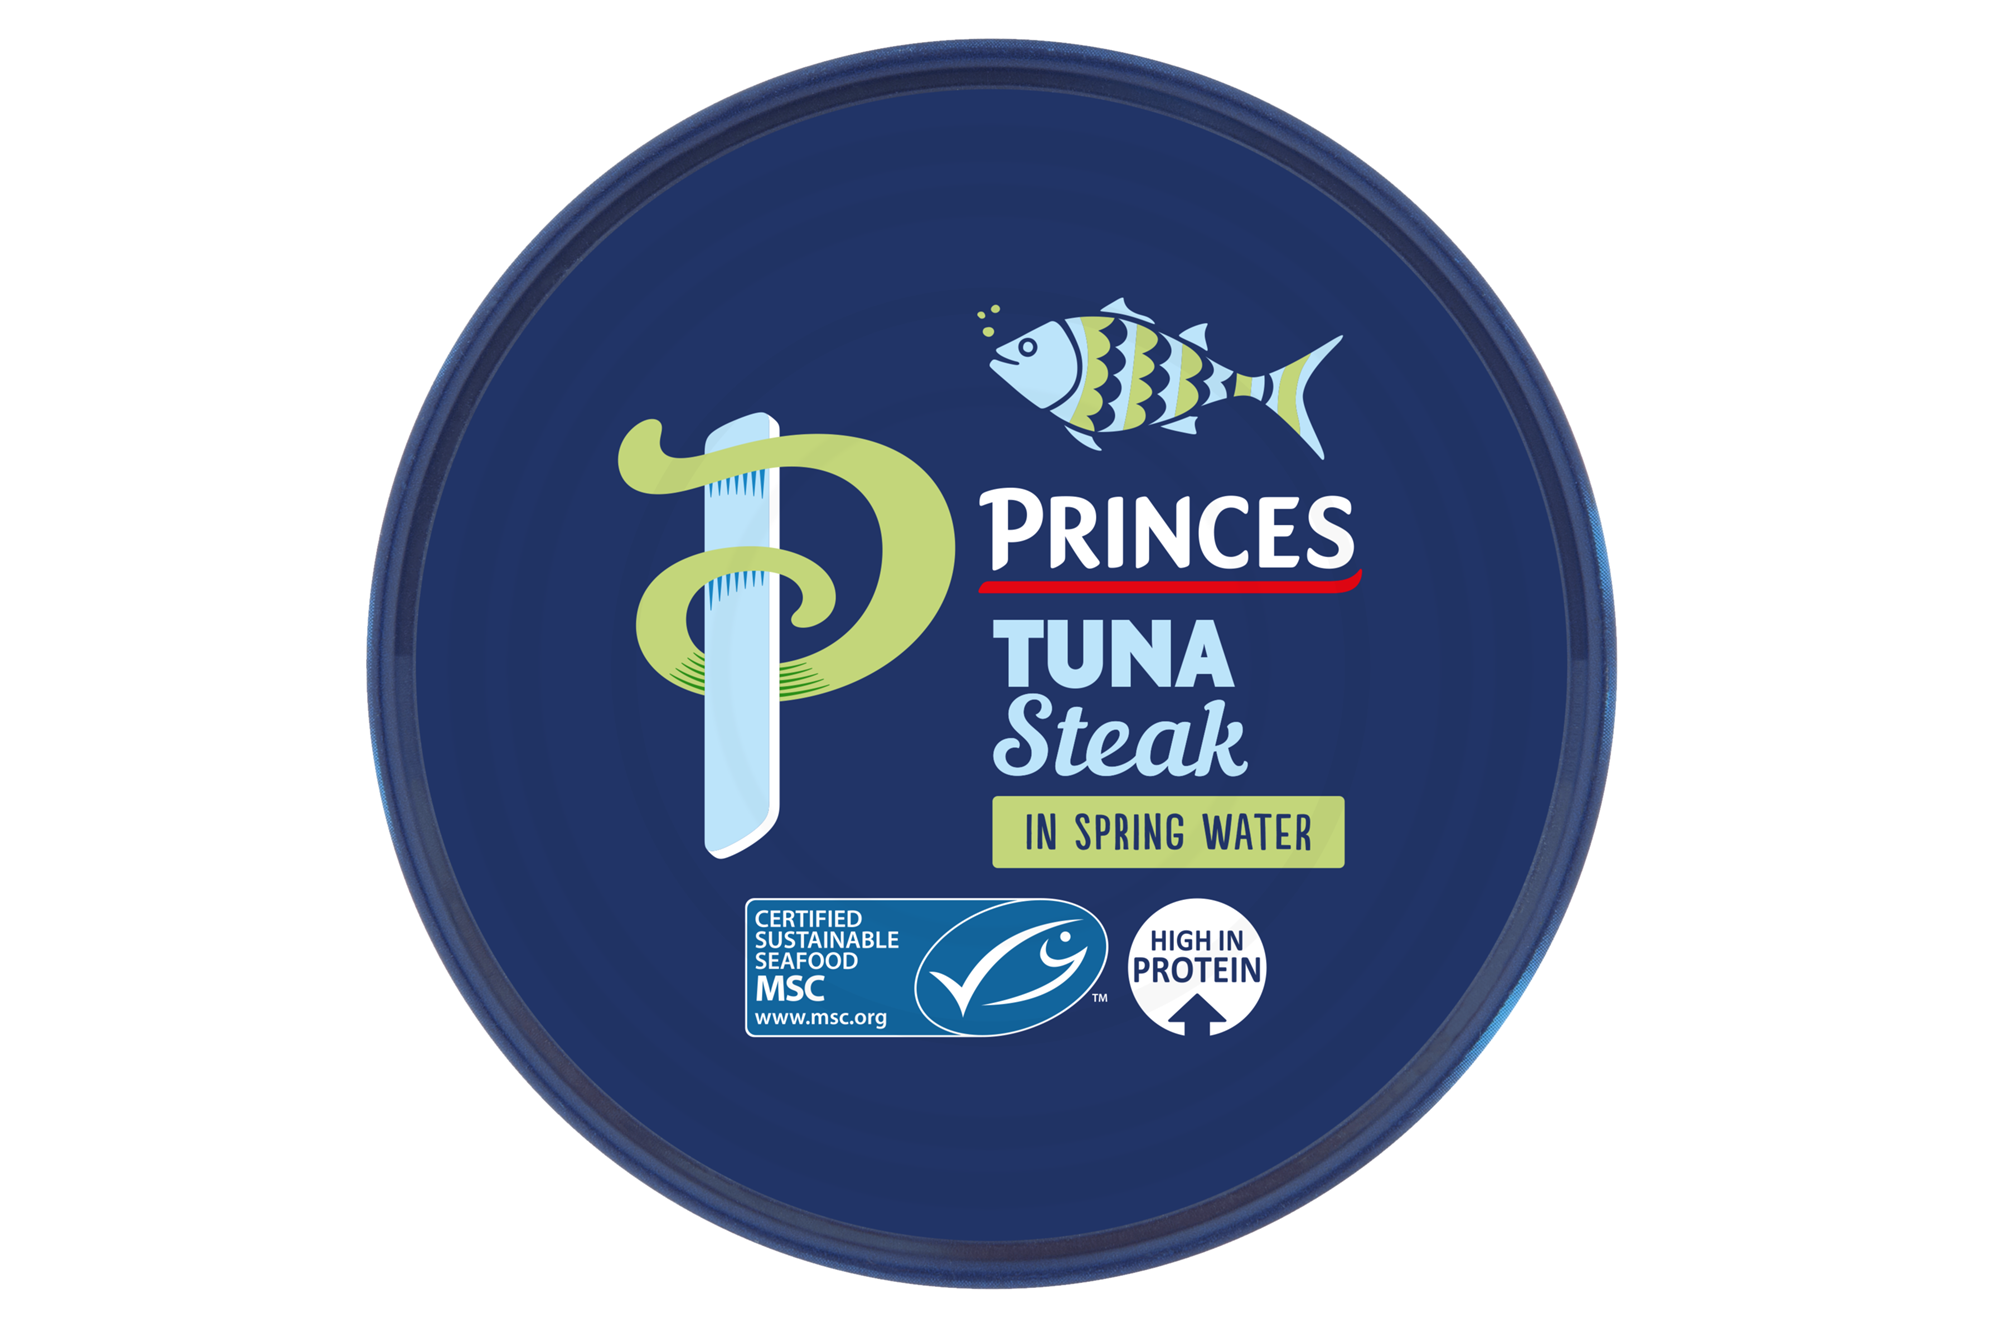 Princes aiming to sell only 100% MSC-certified tuna by 2025